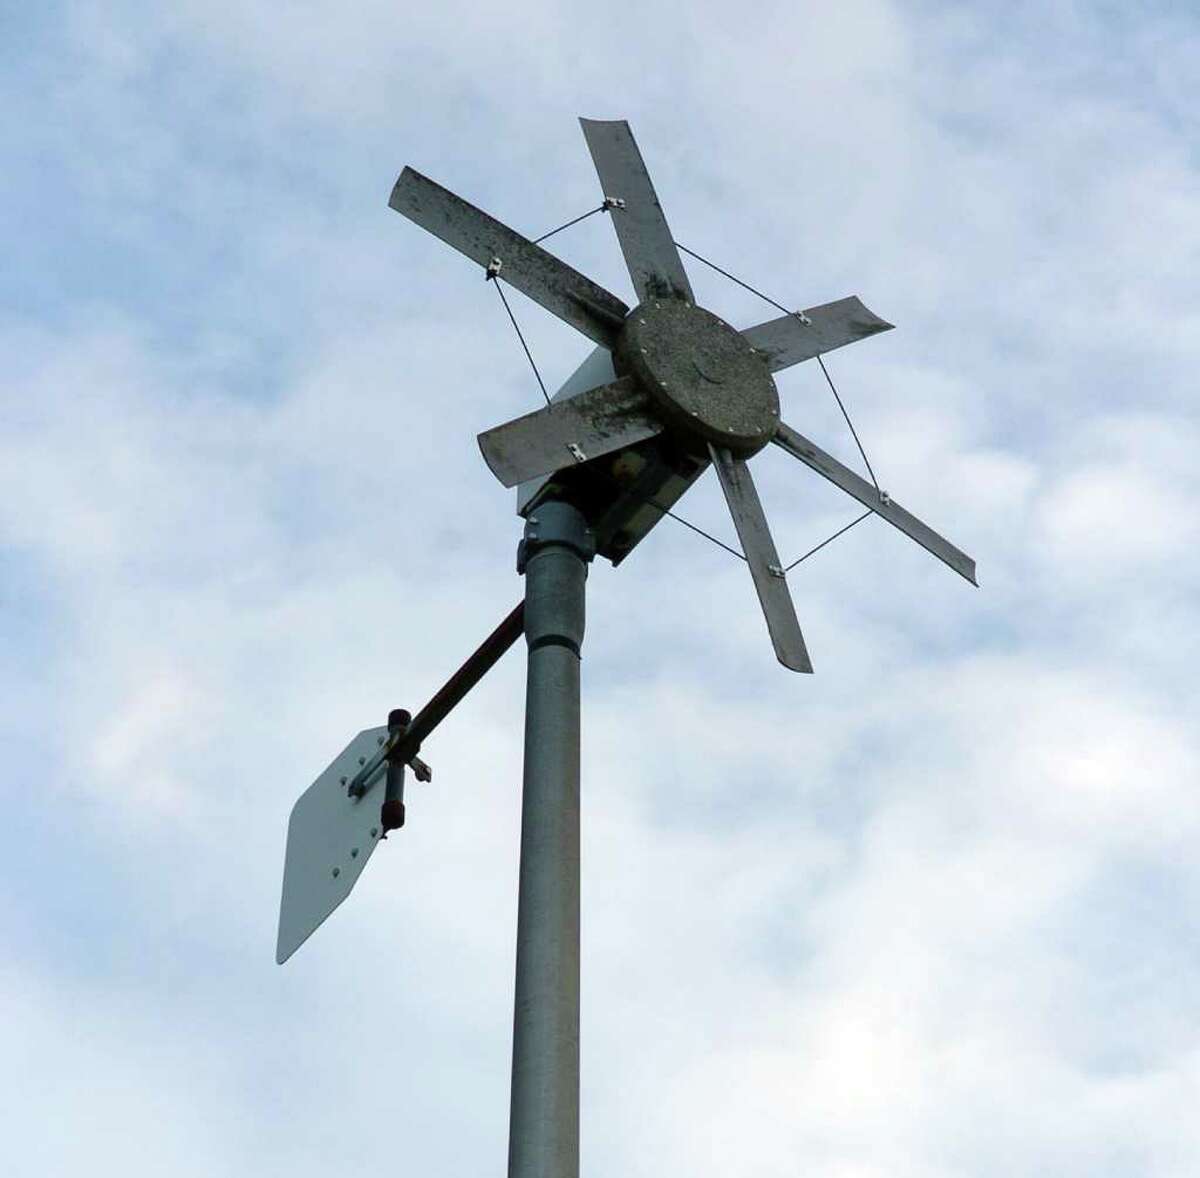 This is a view of a small wind turbine built by Henry D. Rotman behind his house in Milford, Conn. on Tuesday December 7, 2010. It was constructed to generate electric power in 1985. Rotman sucessfully used the power to charge a series of gel batteries used for a diving project. As a former UI engineer, he doubts wind power will work well in Connecticut, due to the unpredictability of the wind here and its lack of sustained strength.